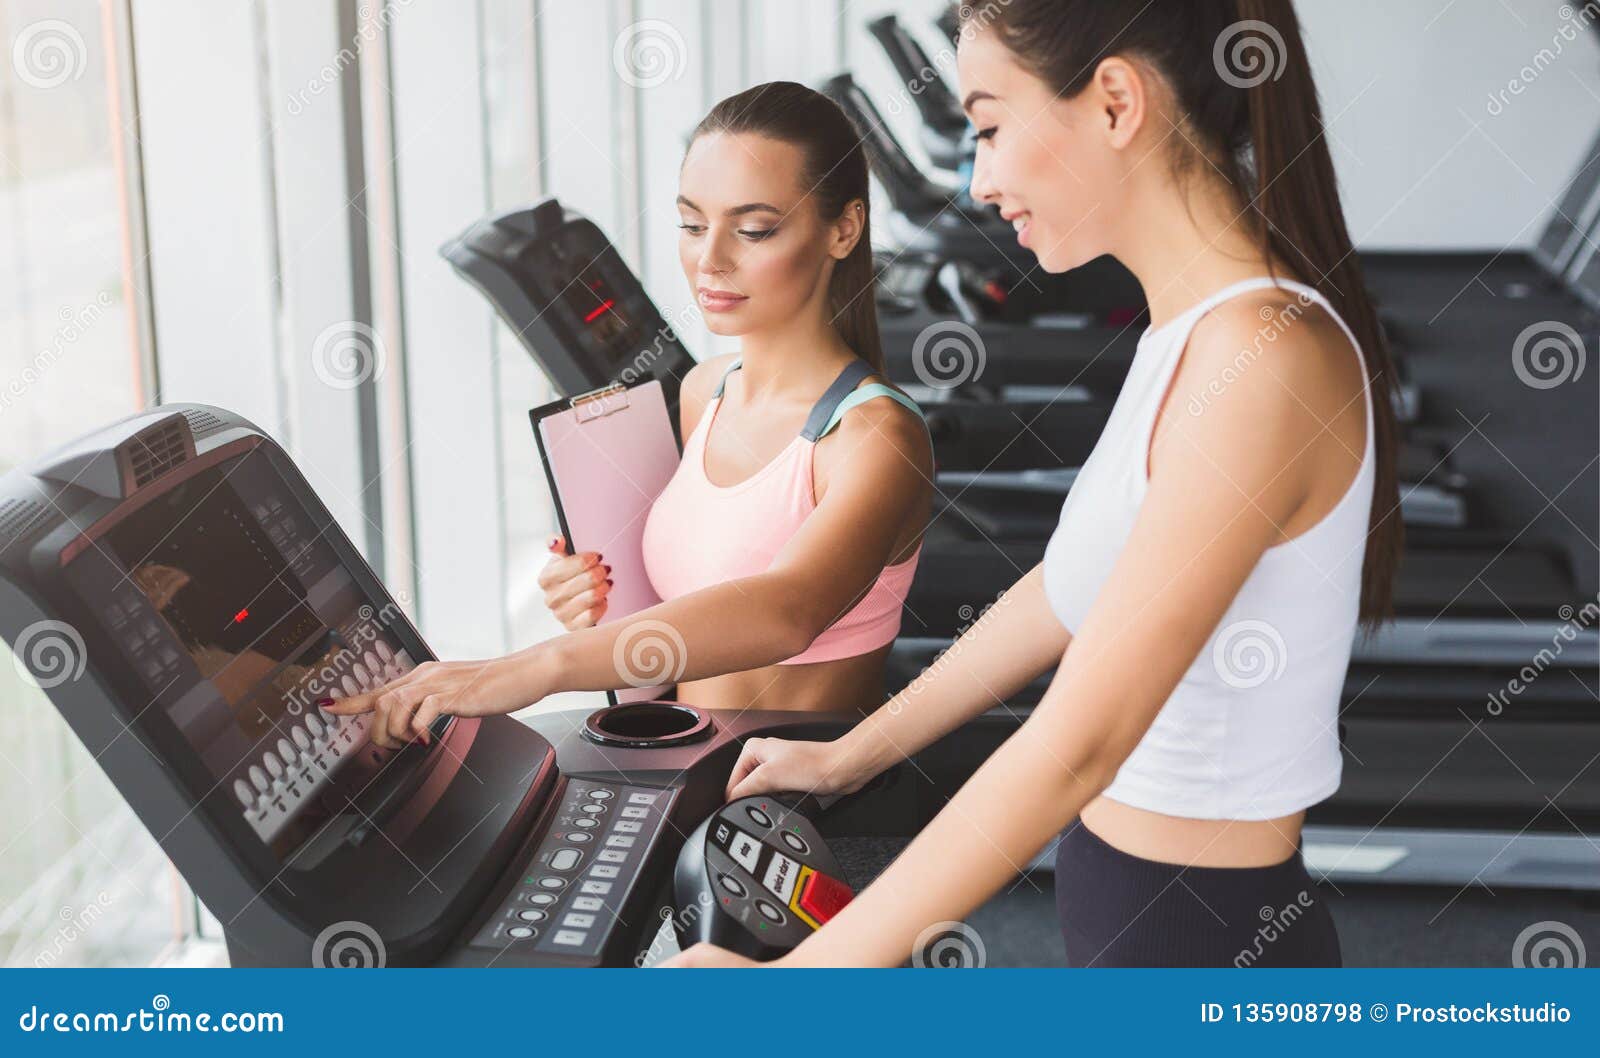 Fitness Instructor Helping Woman On Treadmill In Gym Stock Photo